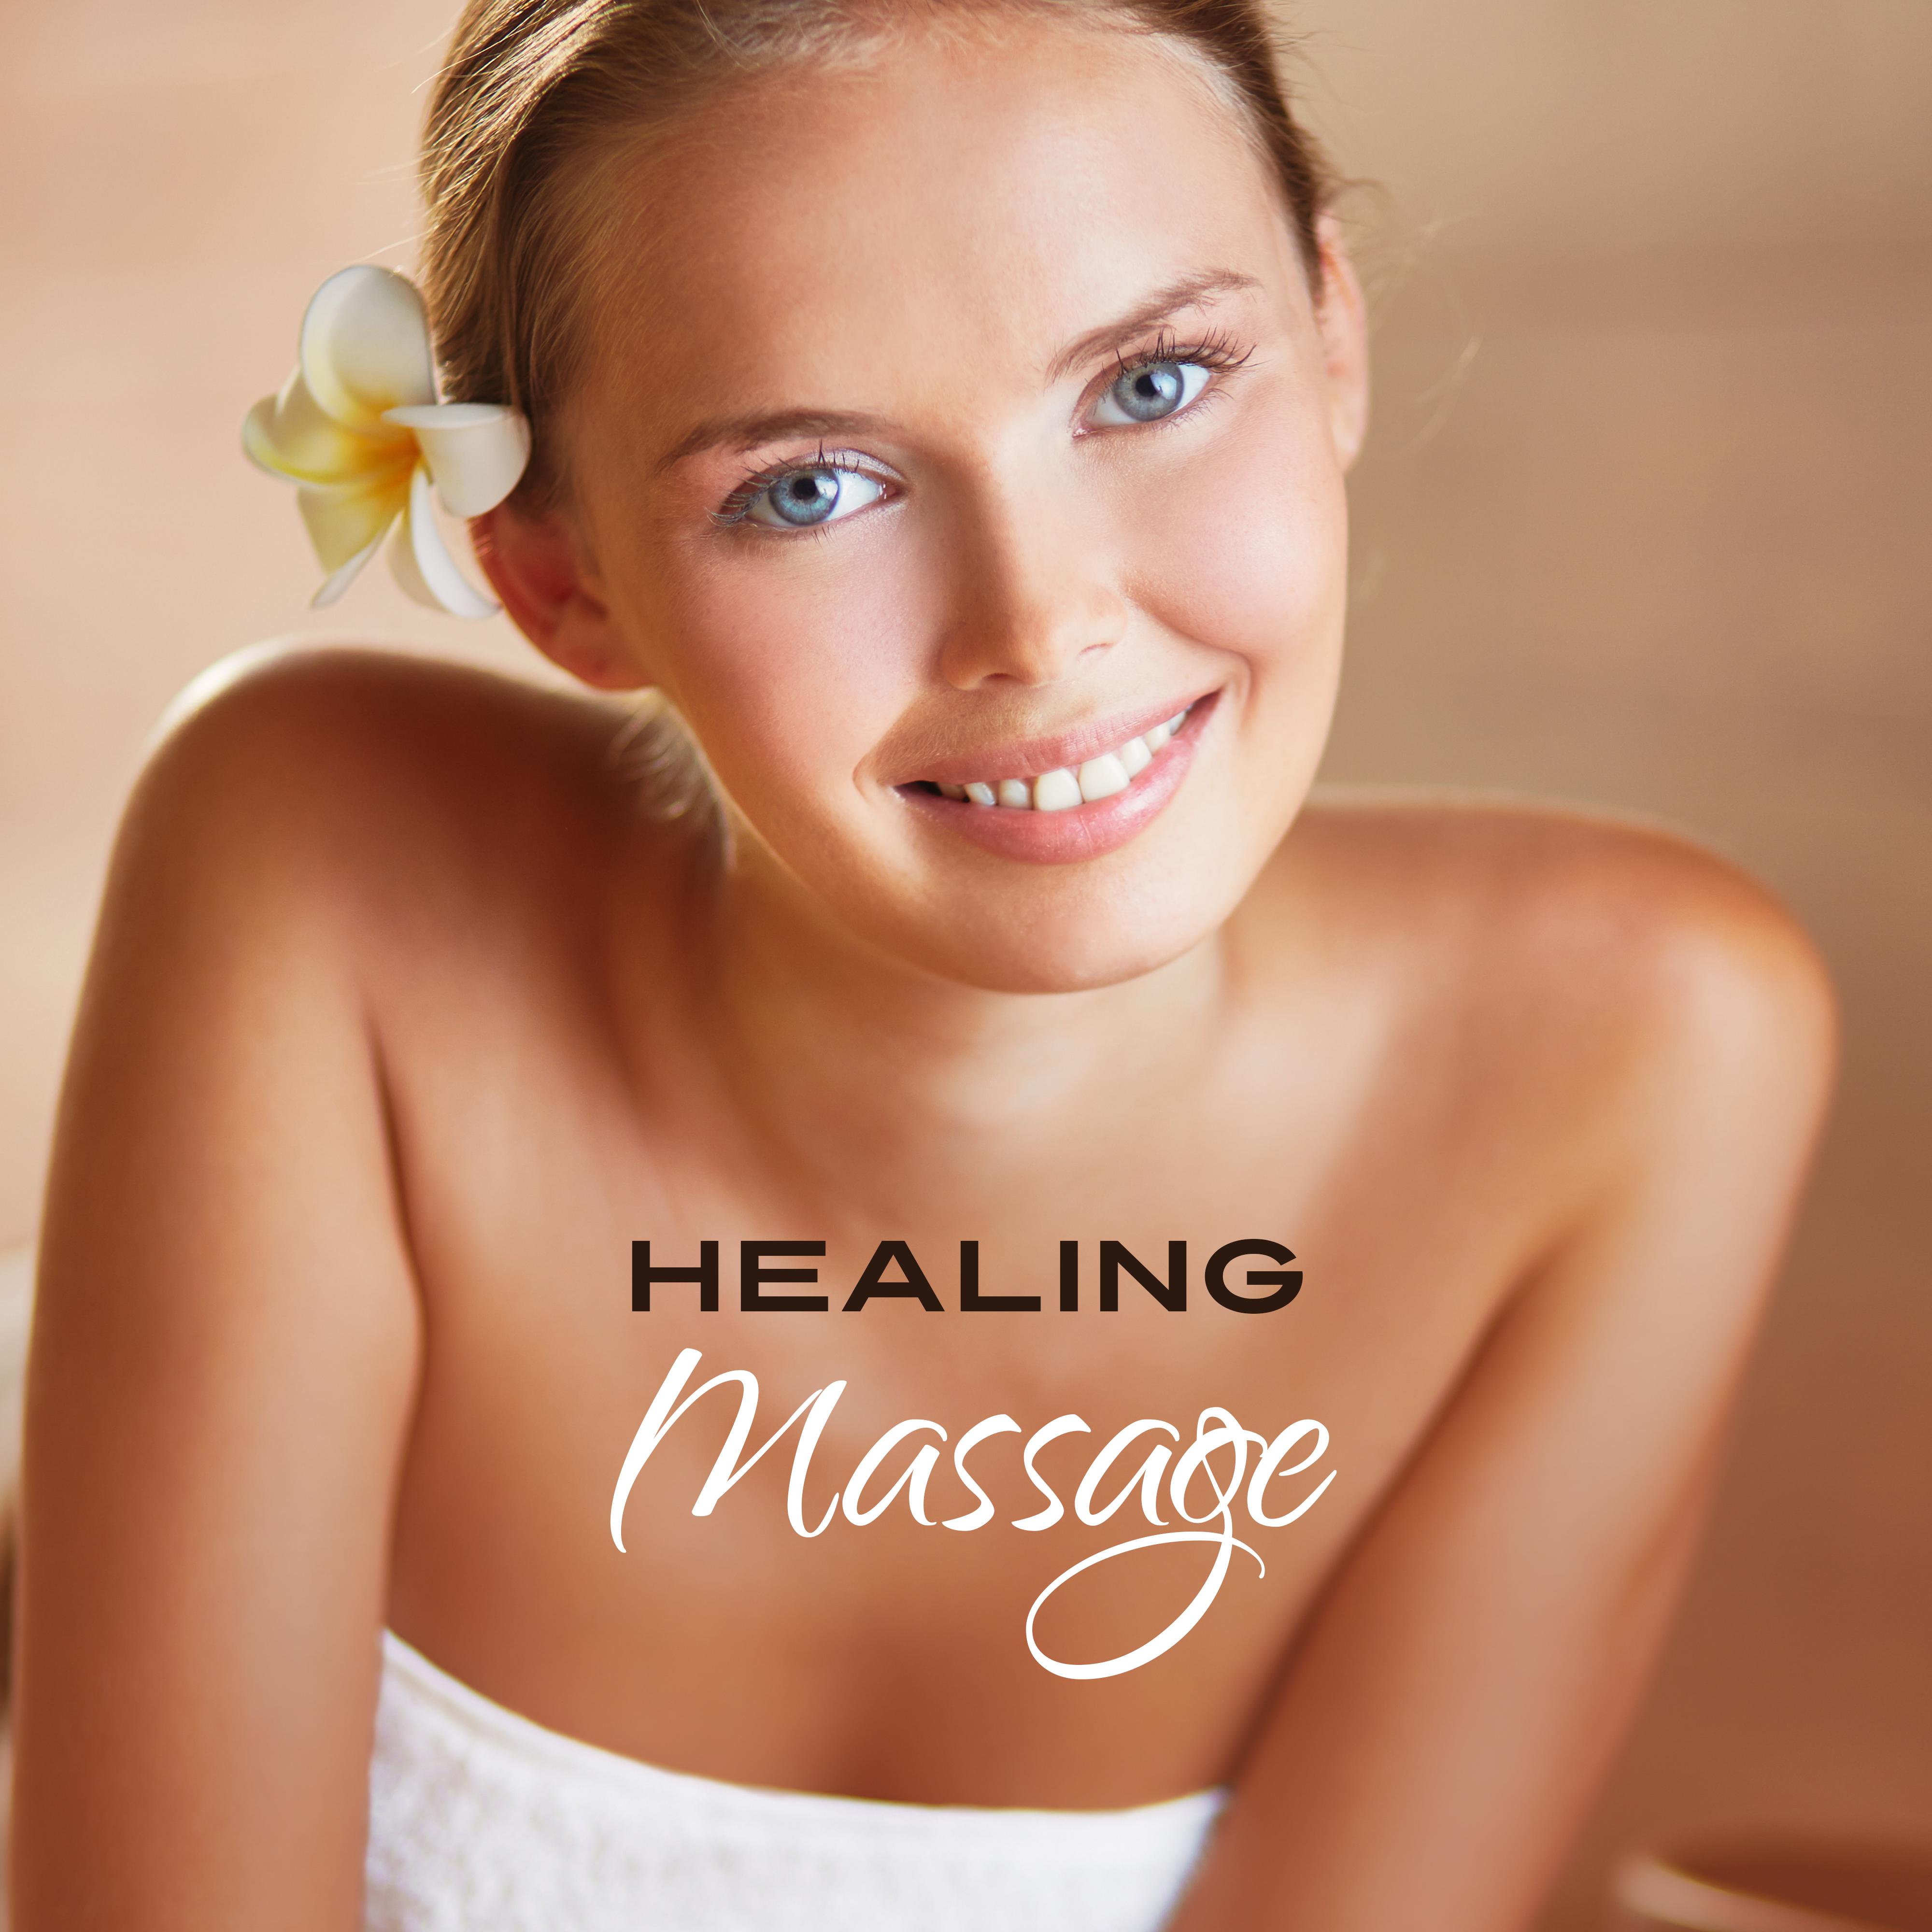 Healing Massage – Peaceful Spa Music, Pure Relaxation, Massage Therapy, Inner Zen, Nature Sounds, New Age